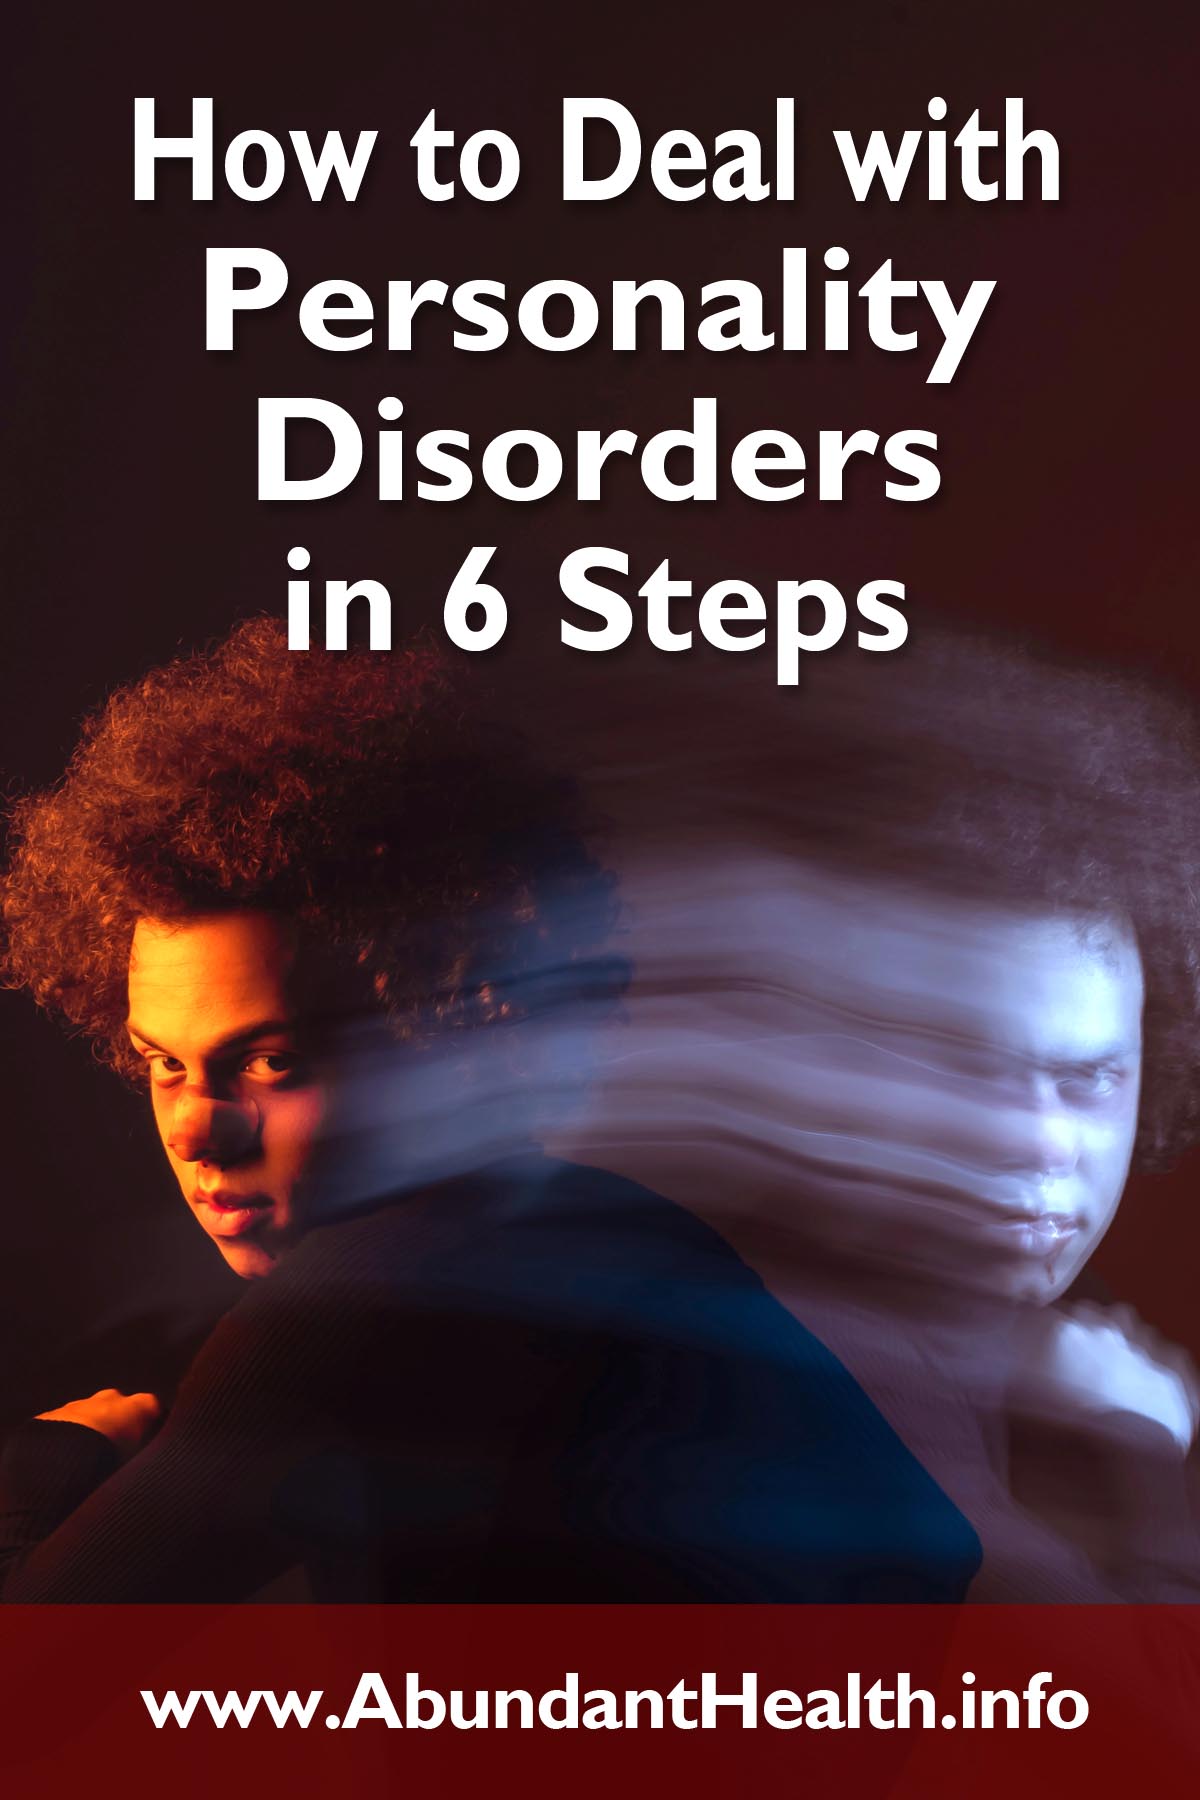 How to Deal with Personality Disorders in 6 Steps